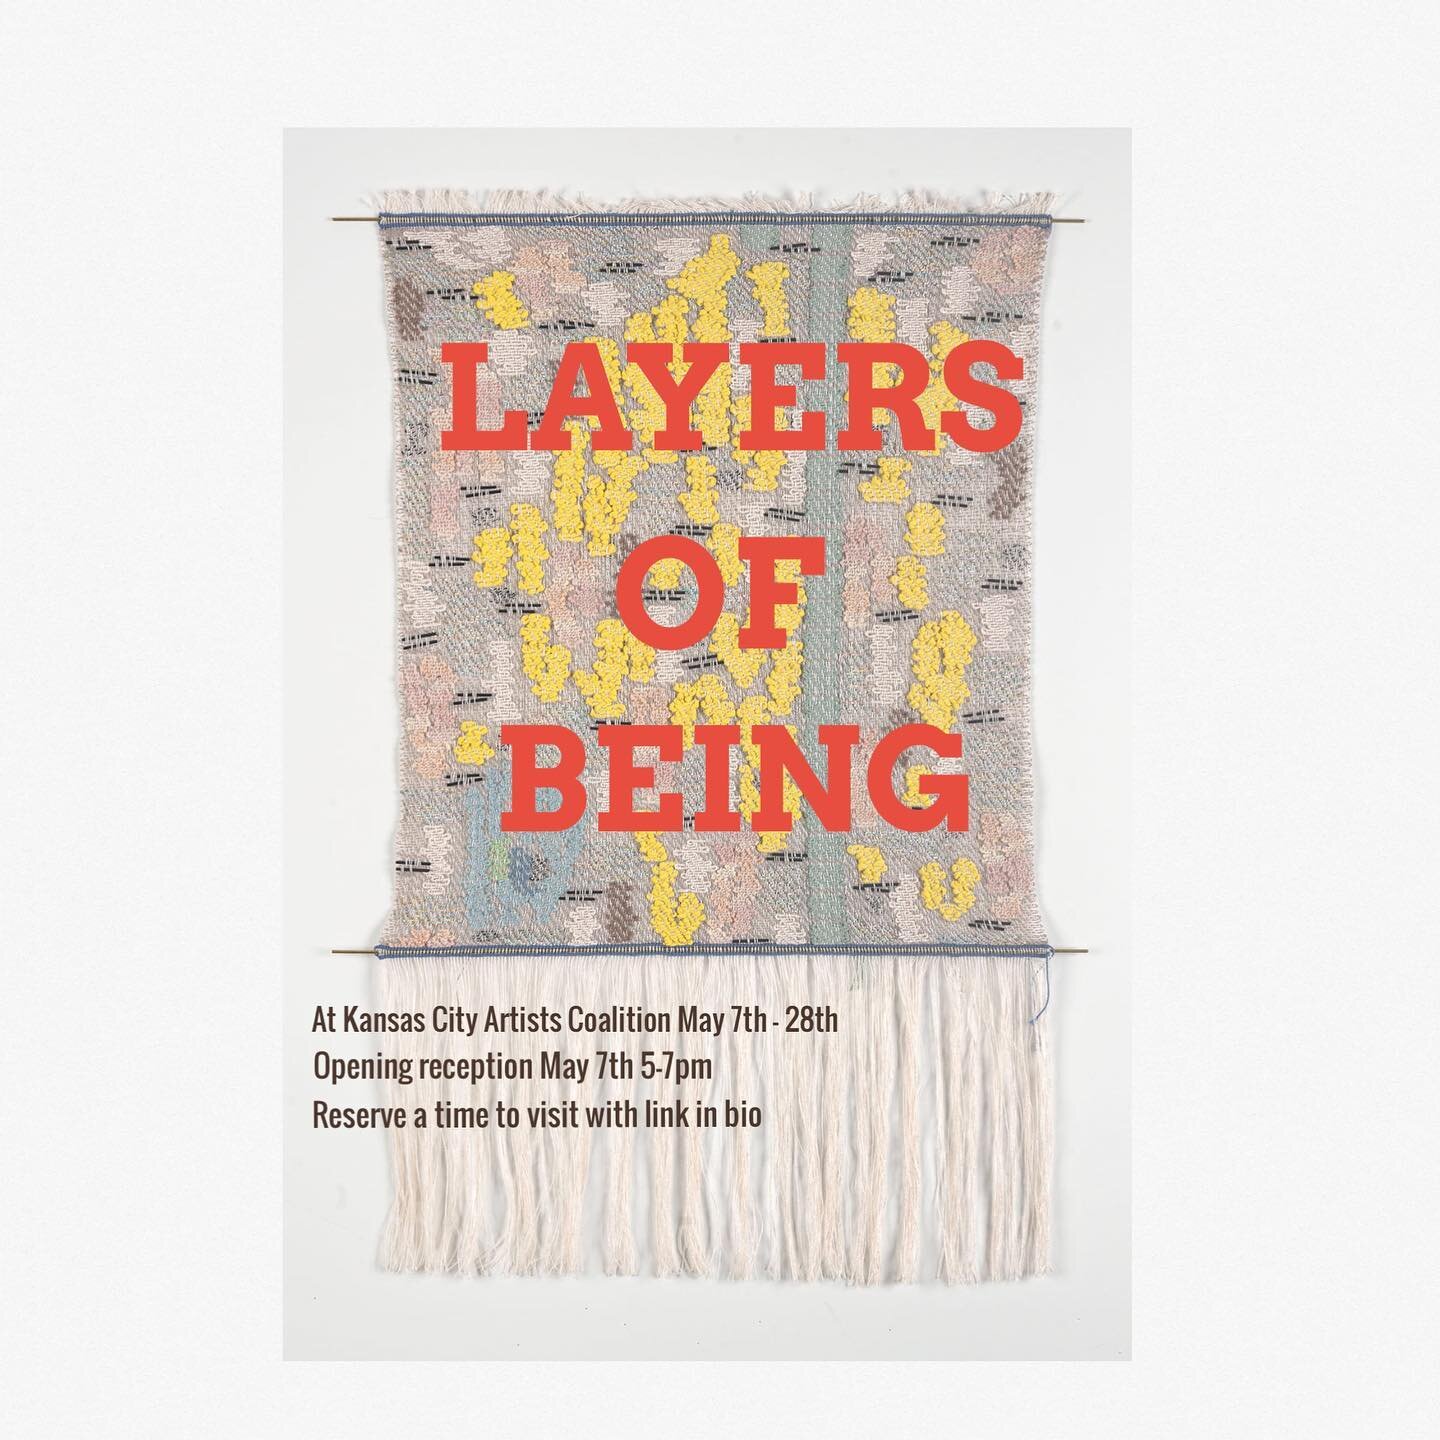 My show Layers of Being opens this Friday, May 7th at Kansas City Artists Coalition!  With a reception that evening from 5-7!! 
If you can&rsquo;t make it to the opening, you can visit the show through May 28th. 
.
.
.
.
.
.
.
.
.
#firstfridays #firs